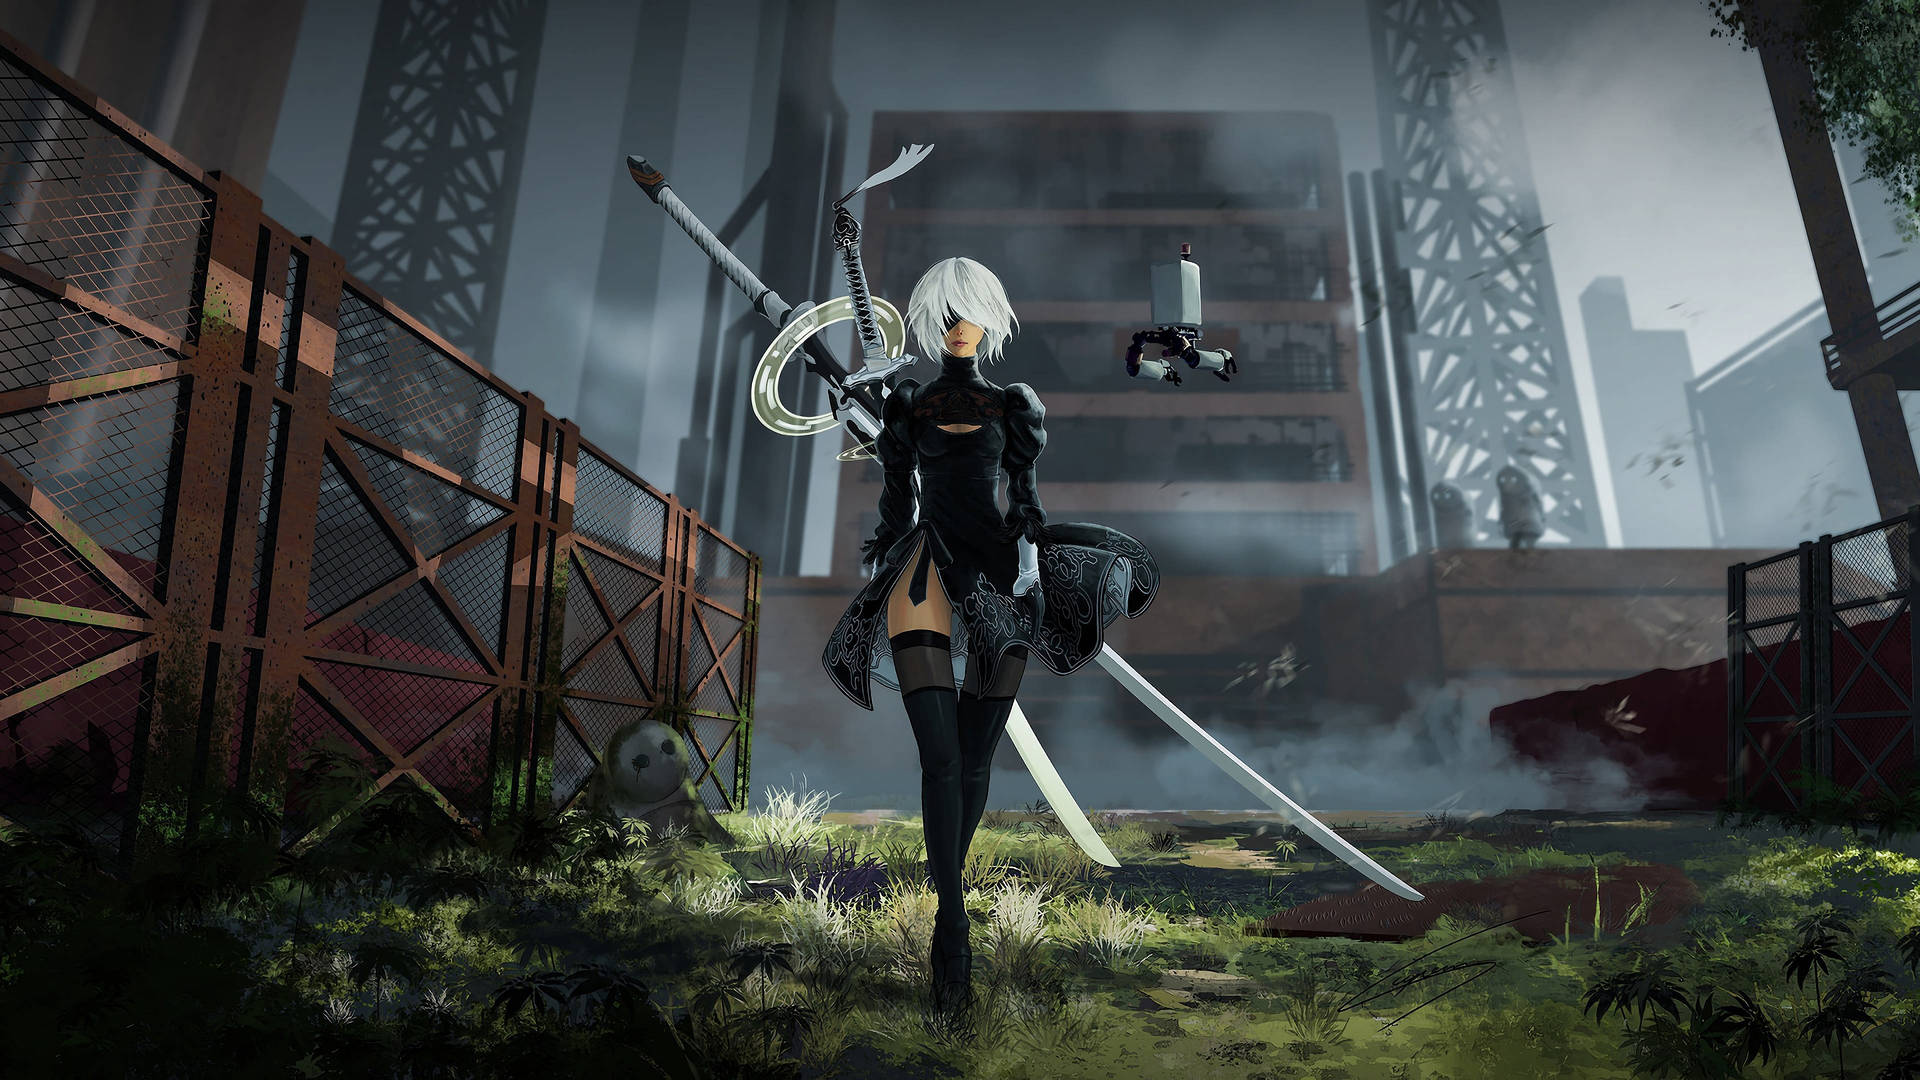 Nier Automata 2b In Rooftop Background